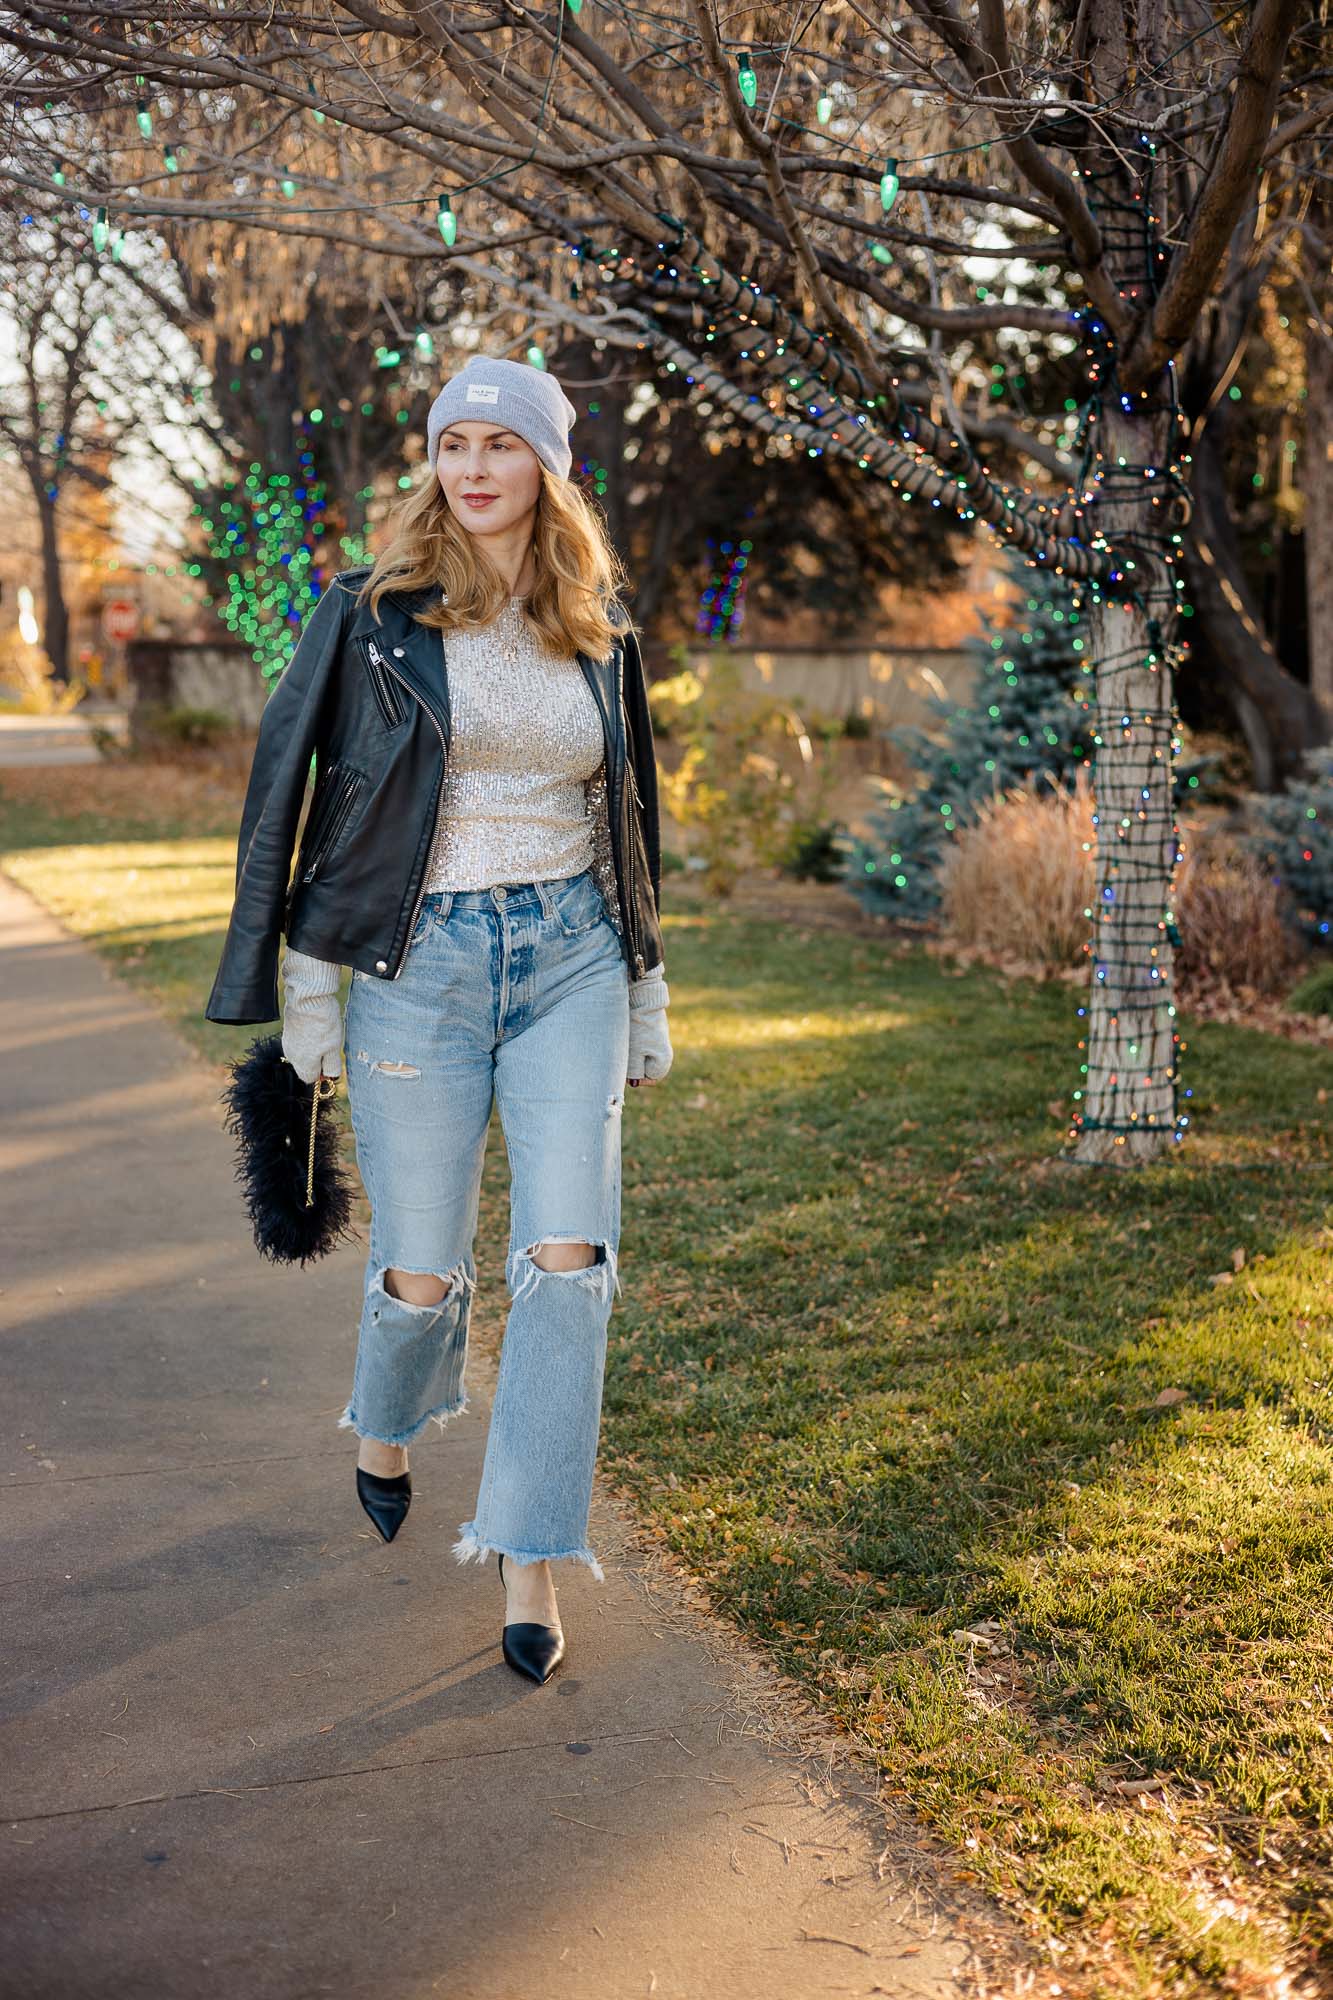 Wearing the Free People Sequin top with Moussy Odessa jeans and an Iro Leather jacket in black.